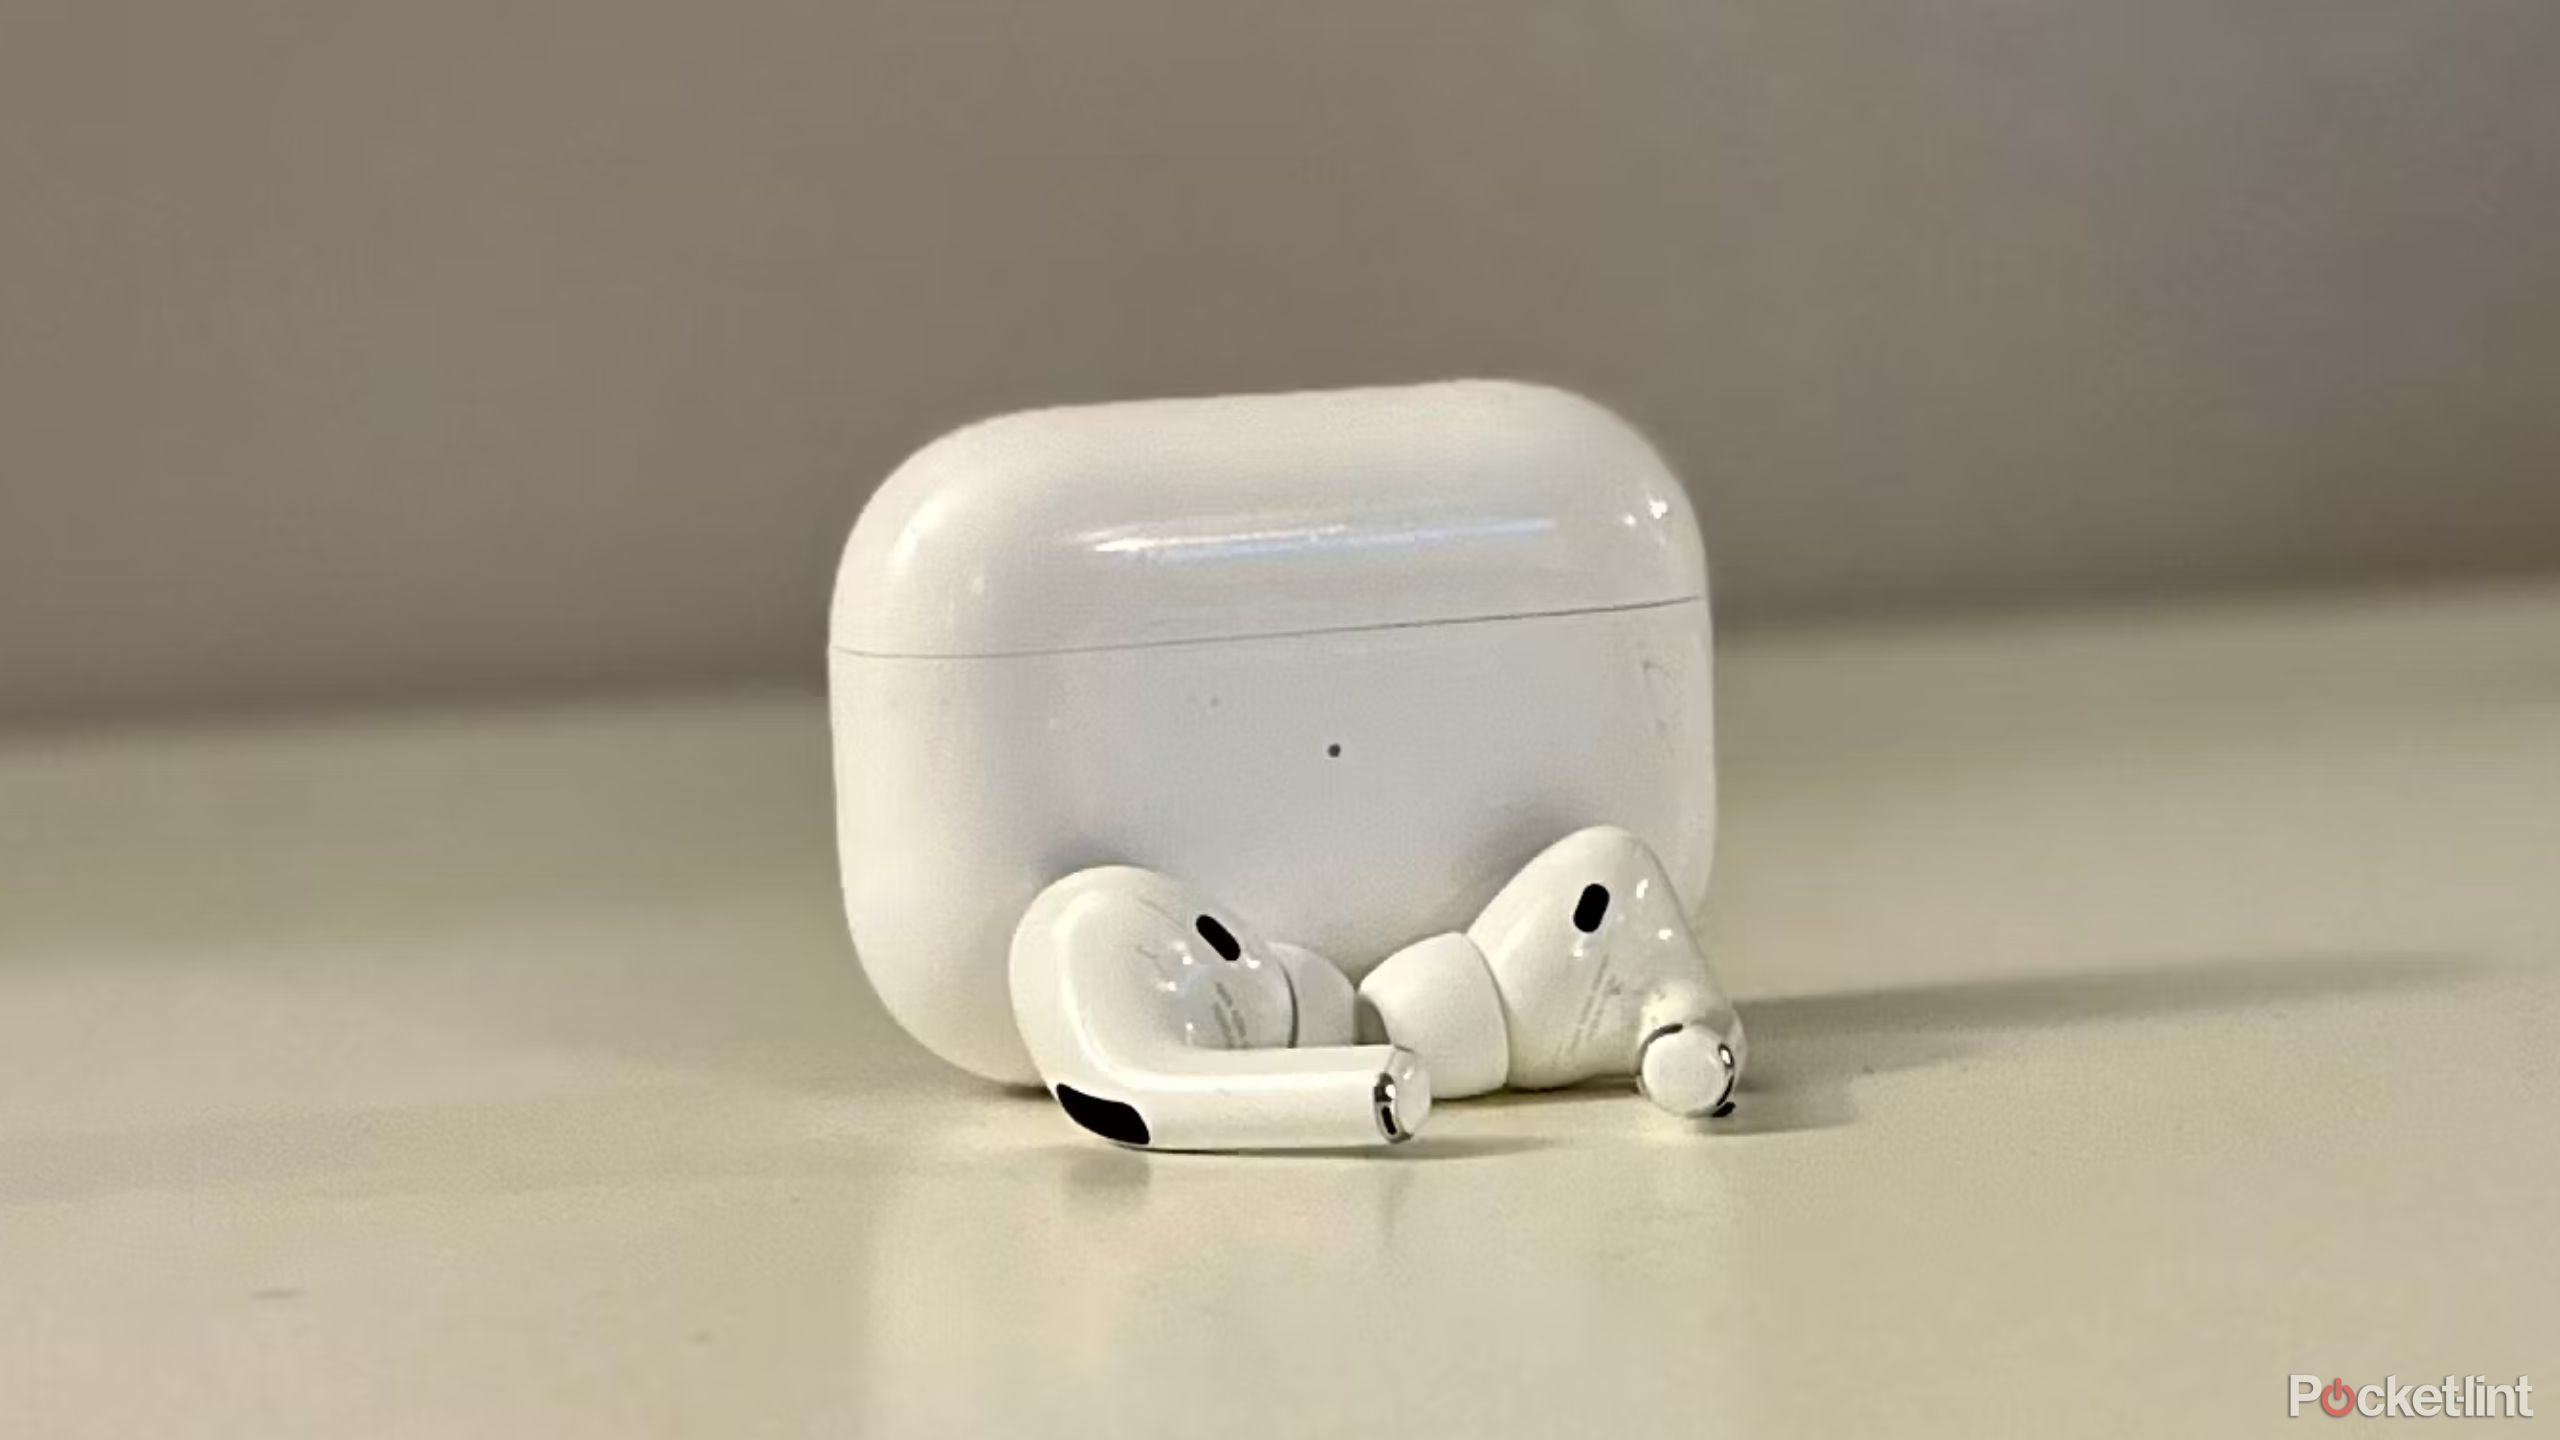 Apple AirPods Pro and their charging case